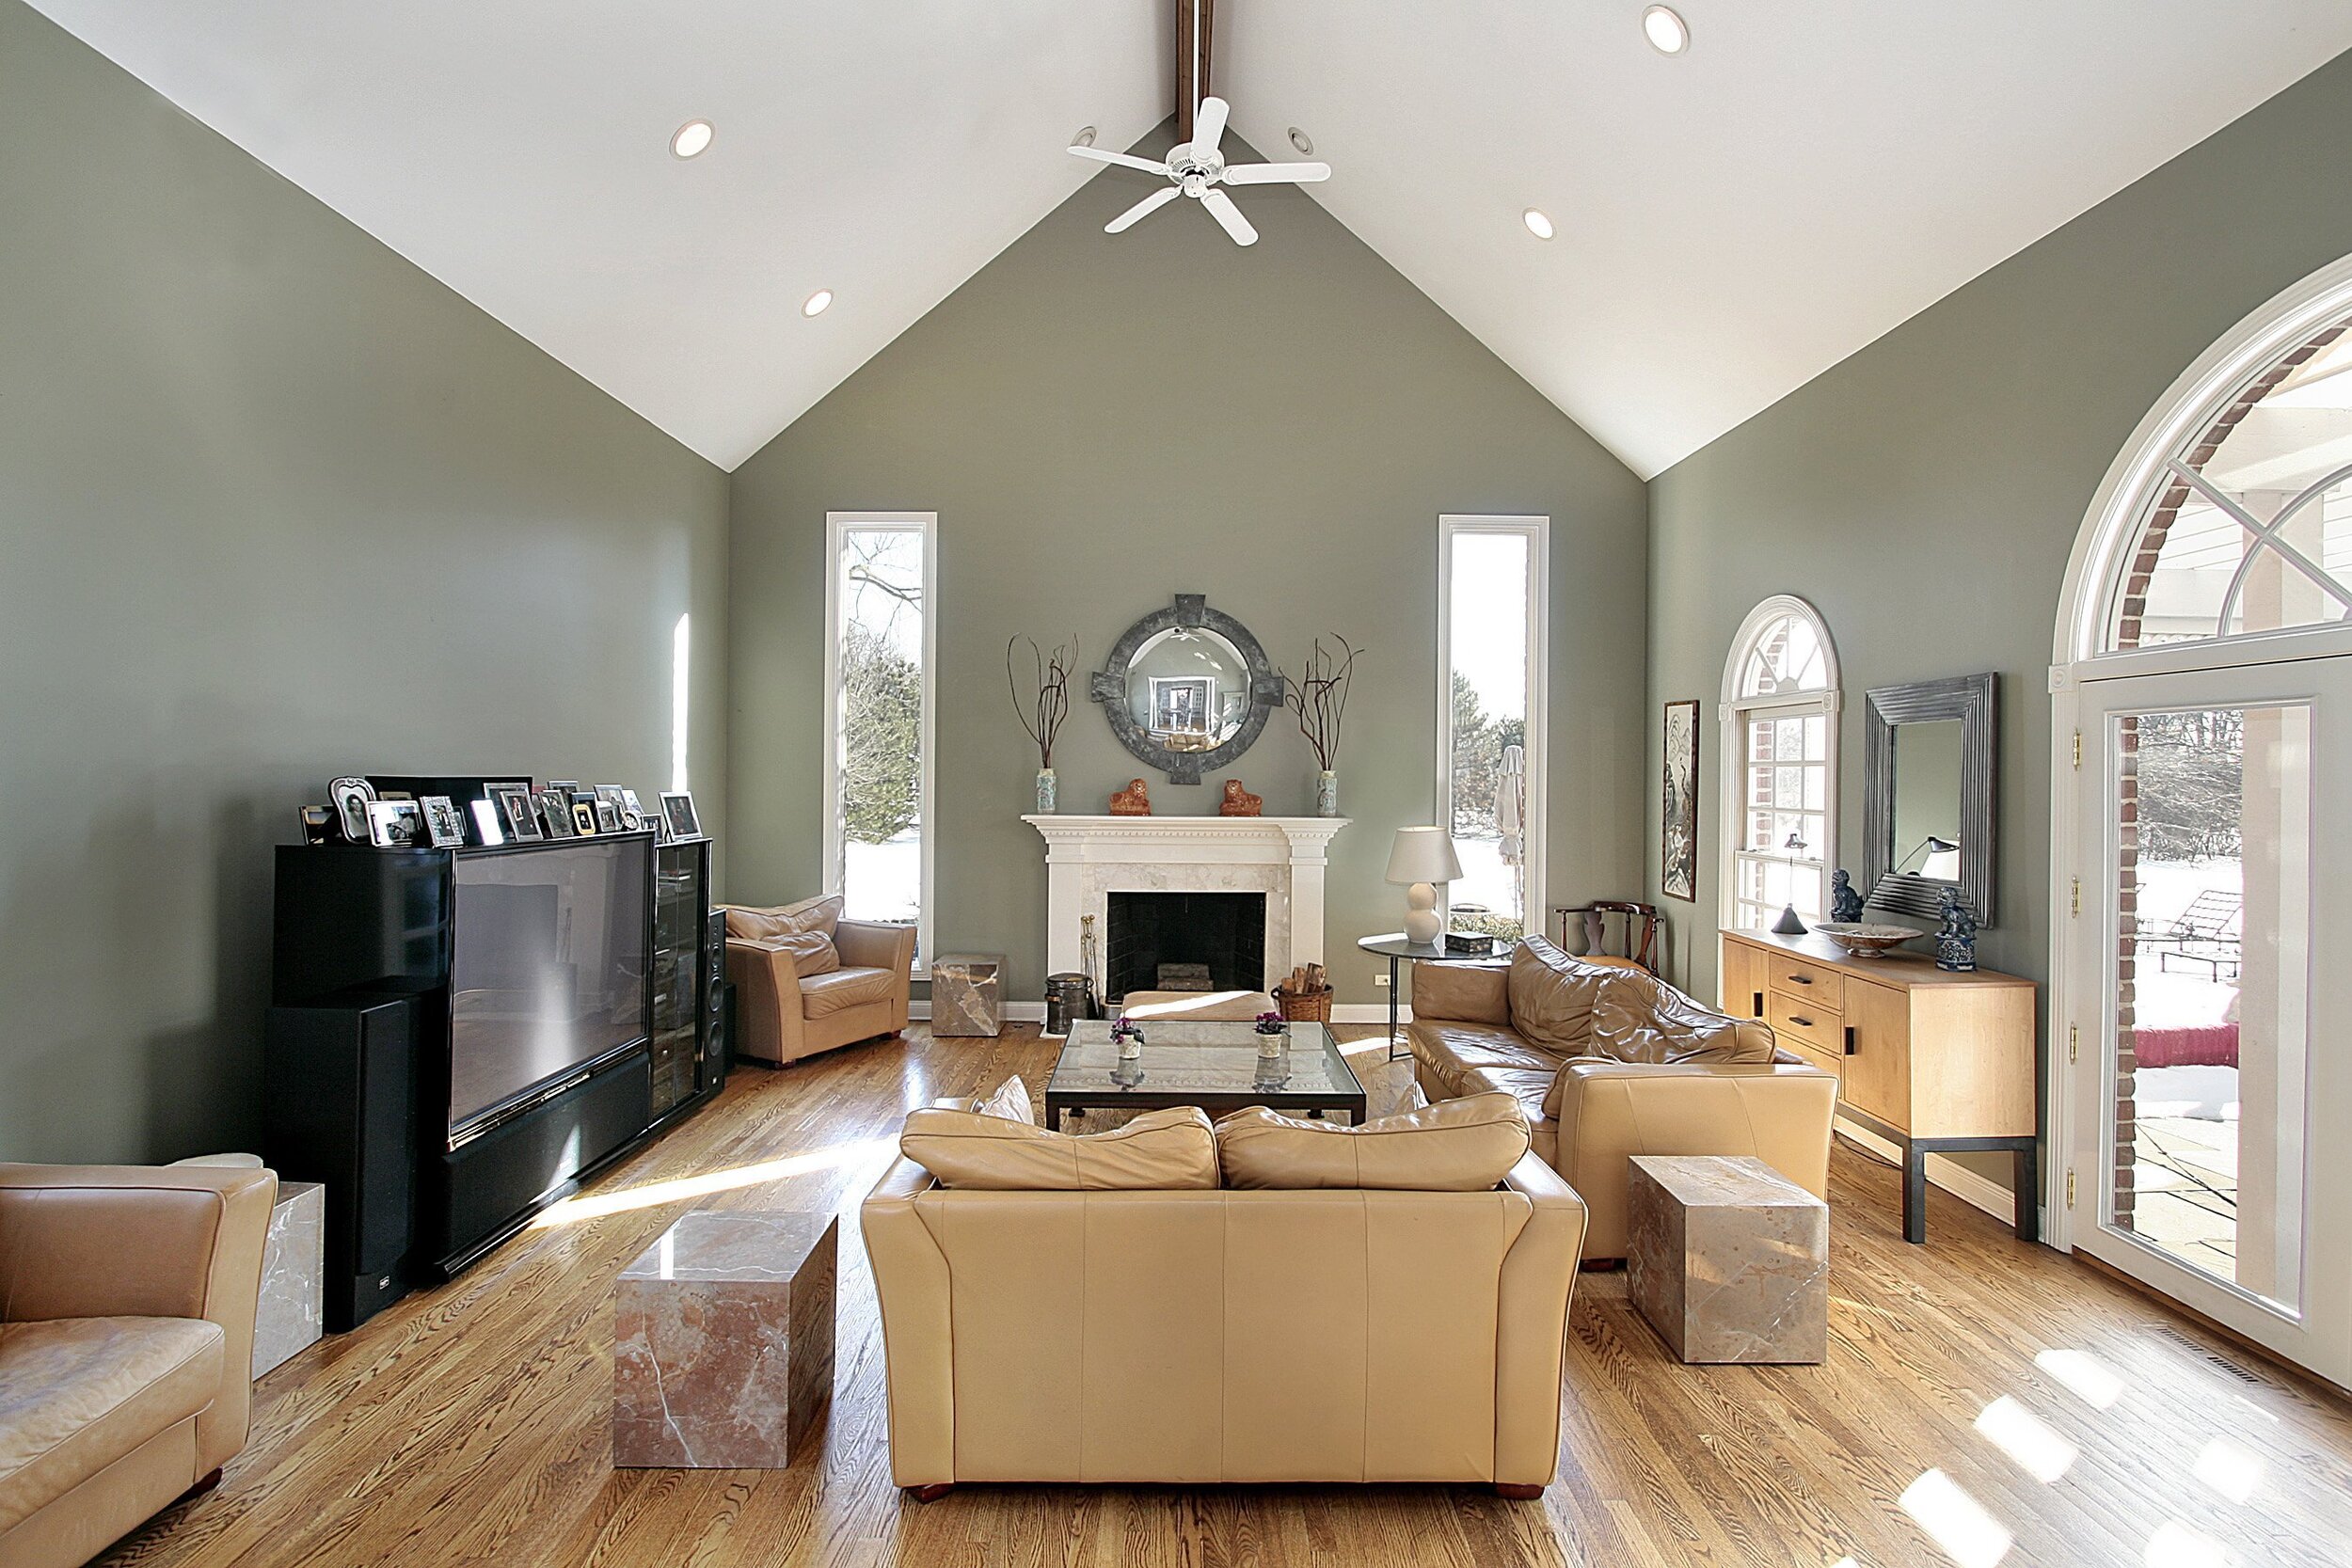 Living Room With Vaulted Ceiling Pictures